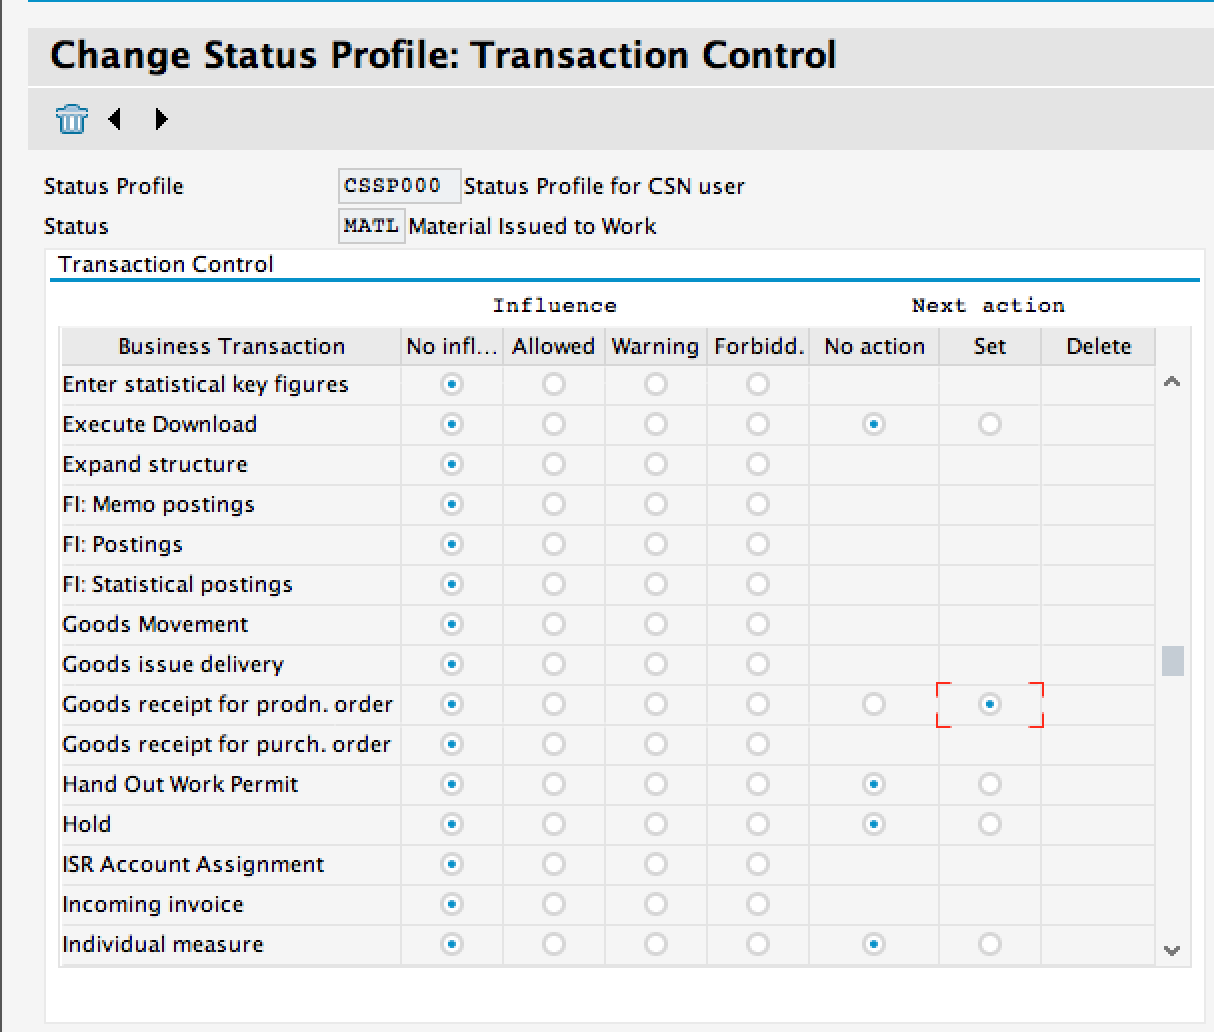 Update Transaction Control Settings